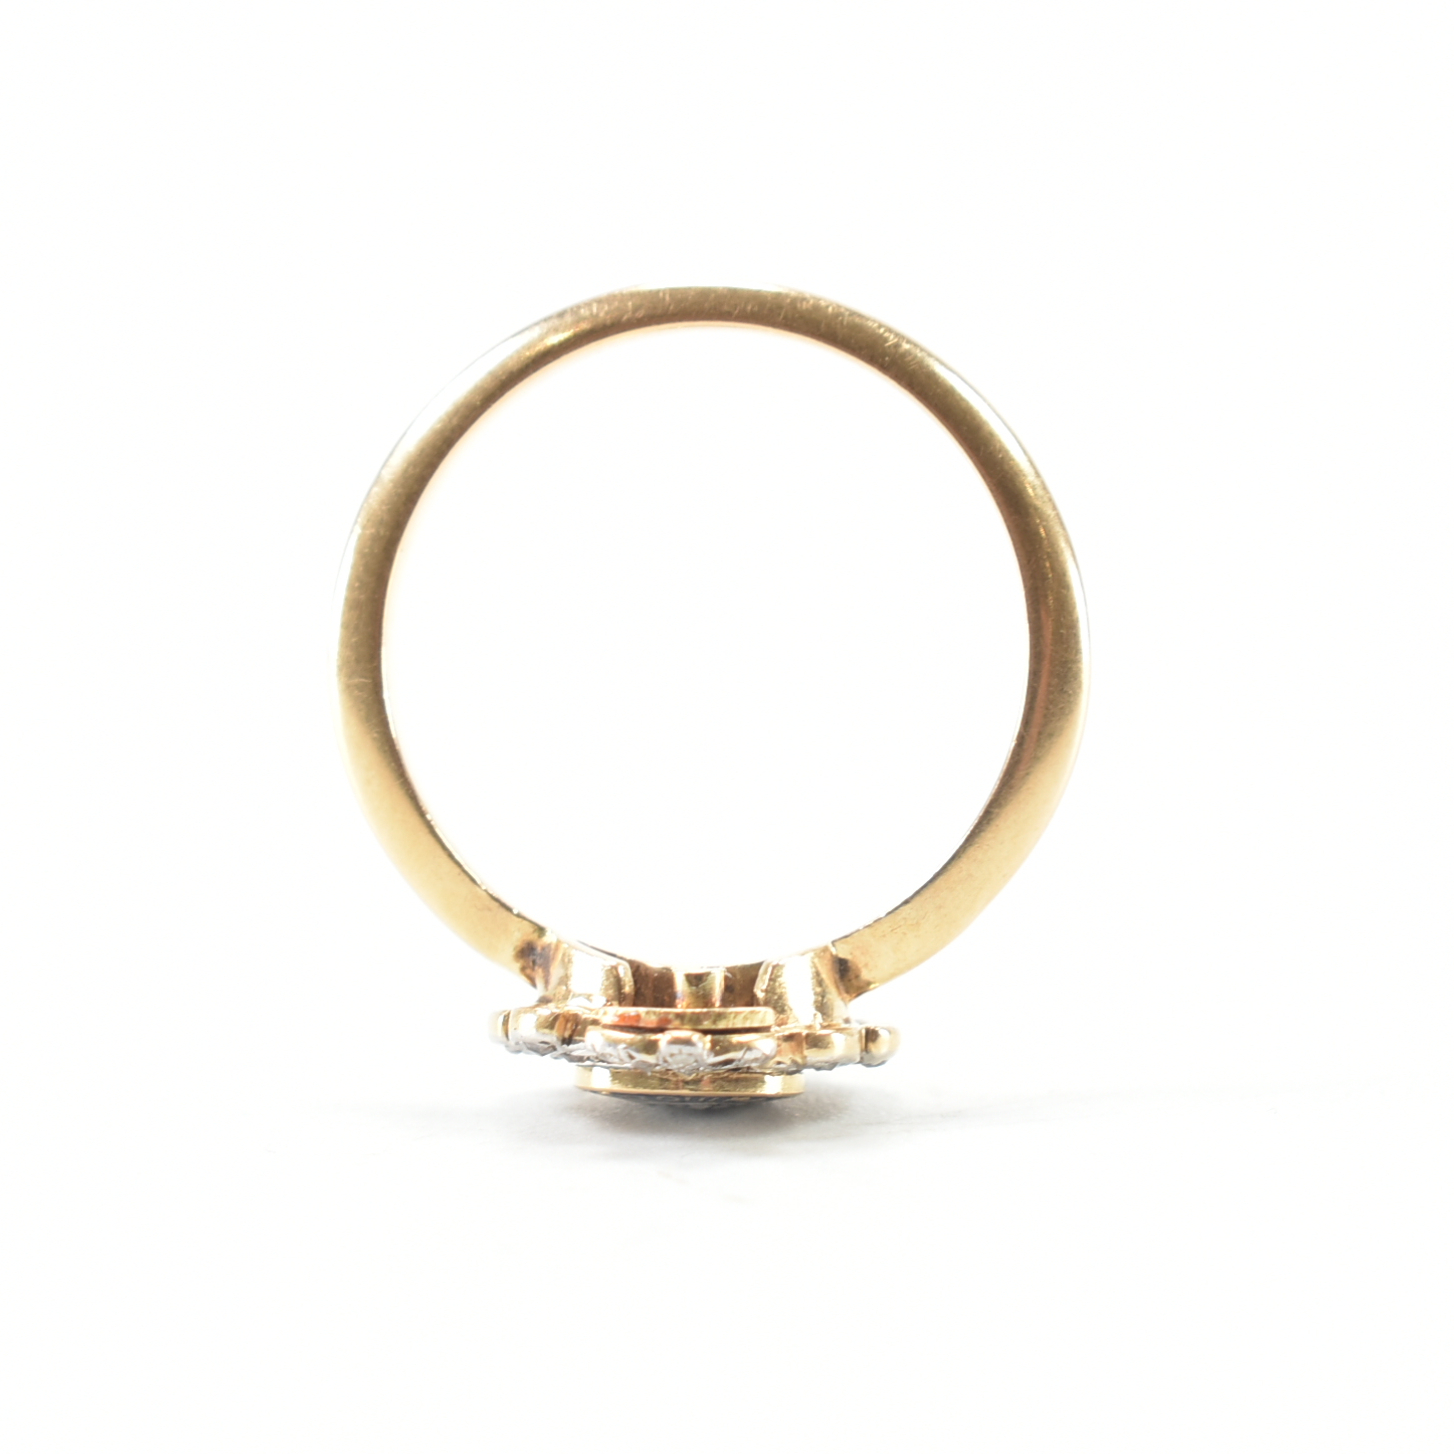 GEORGE VI GOLD & DIAMOND MILITARY SWEETHEART RING - Image 6 of 7